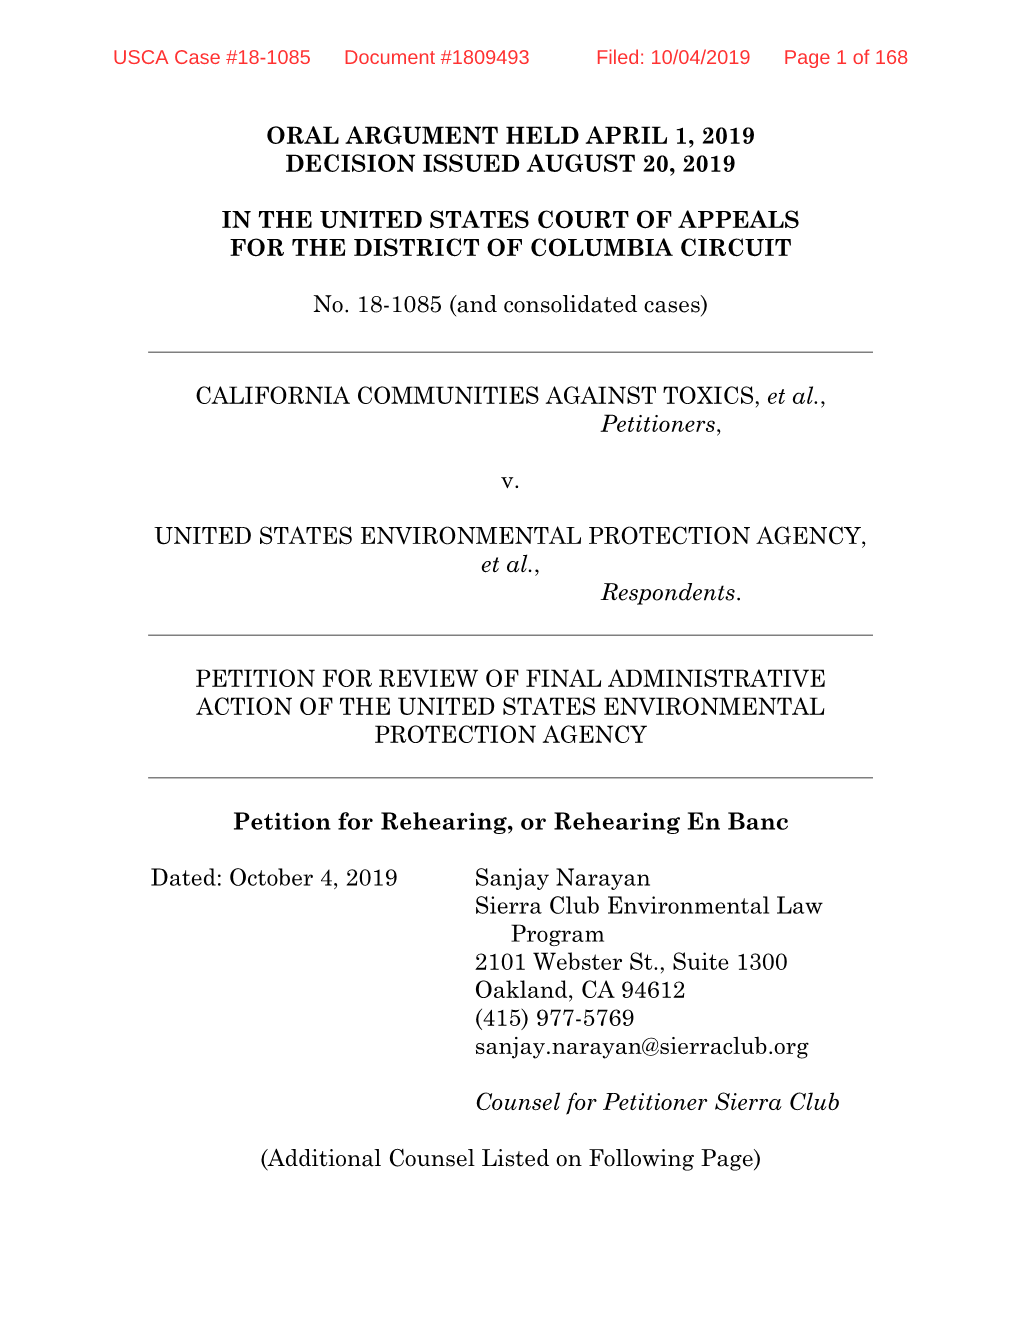 USCA Case #18-1085 Document #1809493 Filed: 10/04/2019 Page 1 of 168